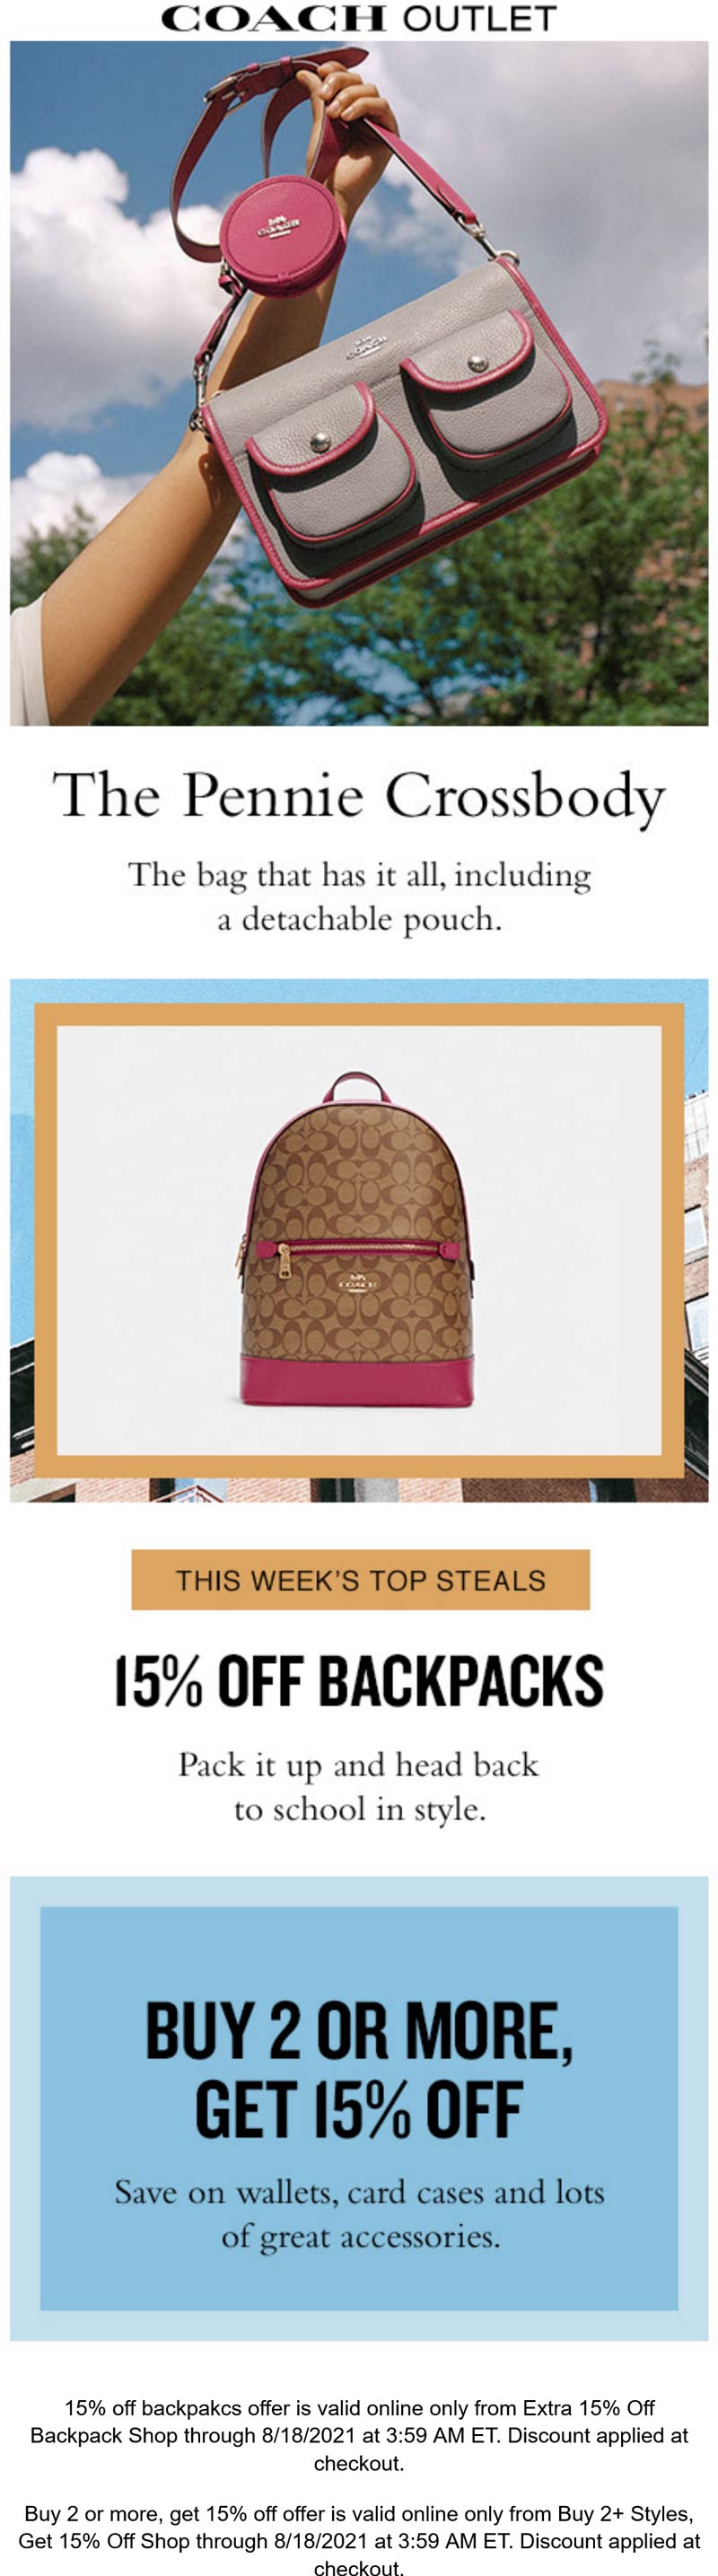 Coach Outlet stores Coupon  15% off backpacks & more online at Coach Outlet #coachoutlet 